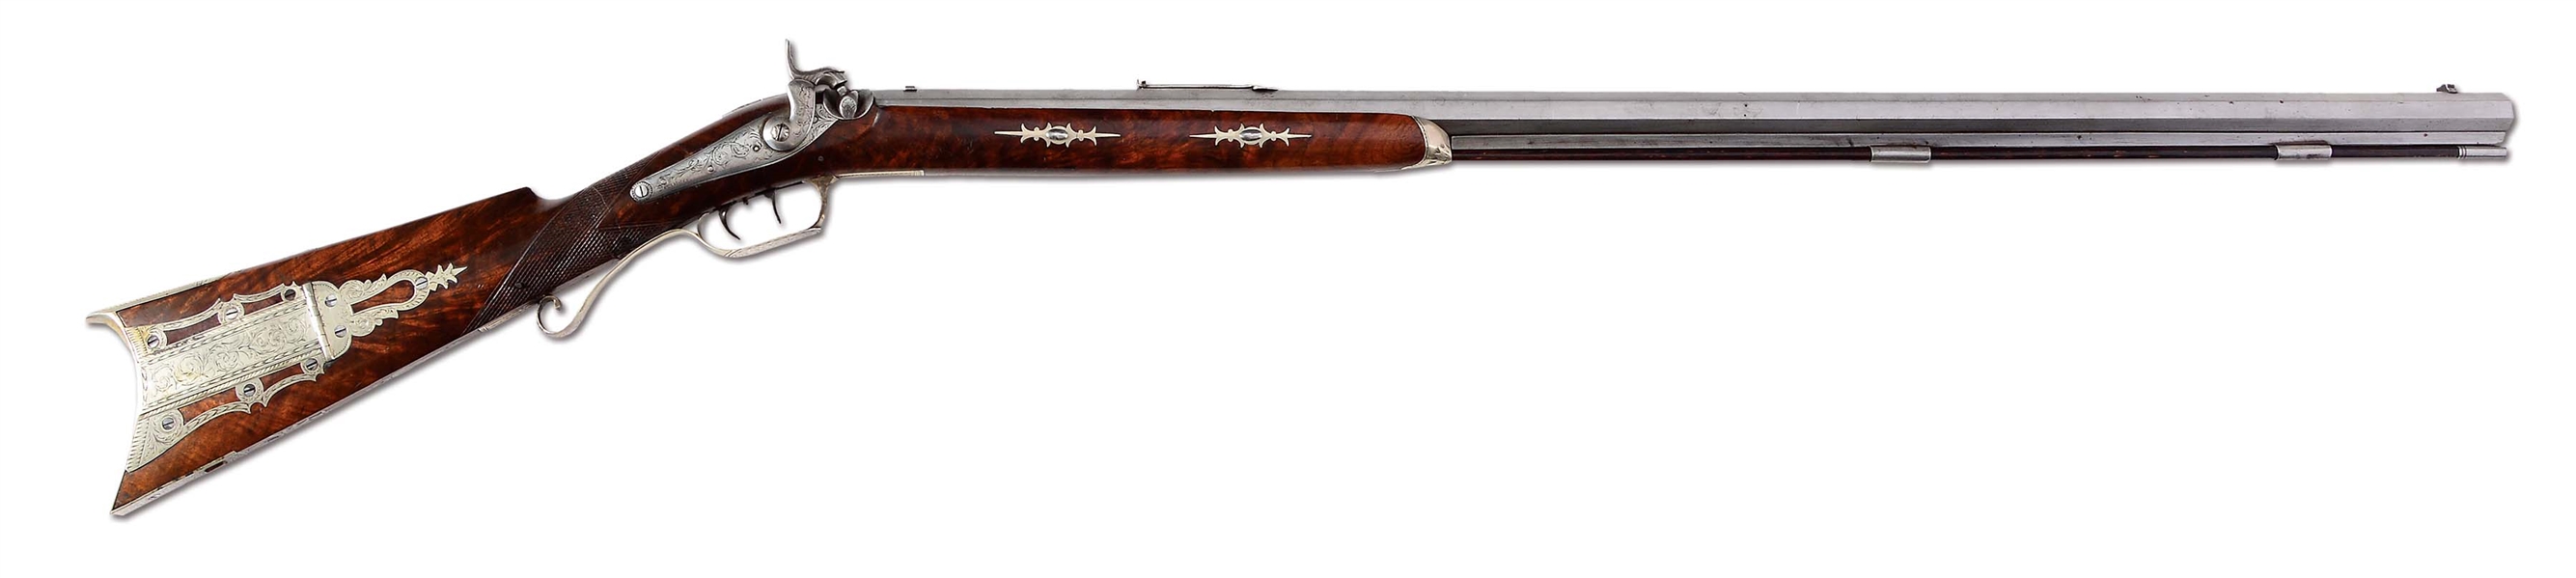 (A) EXCEPTIONALLY FINE AND RARE PERCUSSION SILVER MOUNTED DERINGER RIFLE OWNED BY EDWIN FORREST.